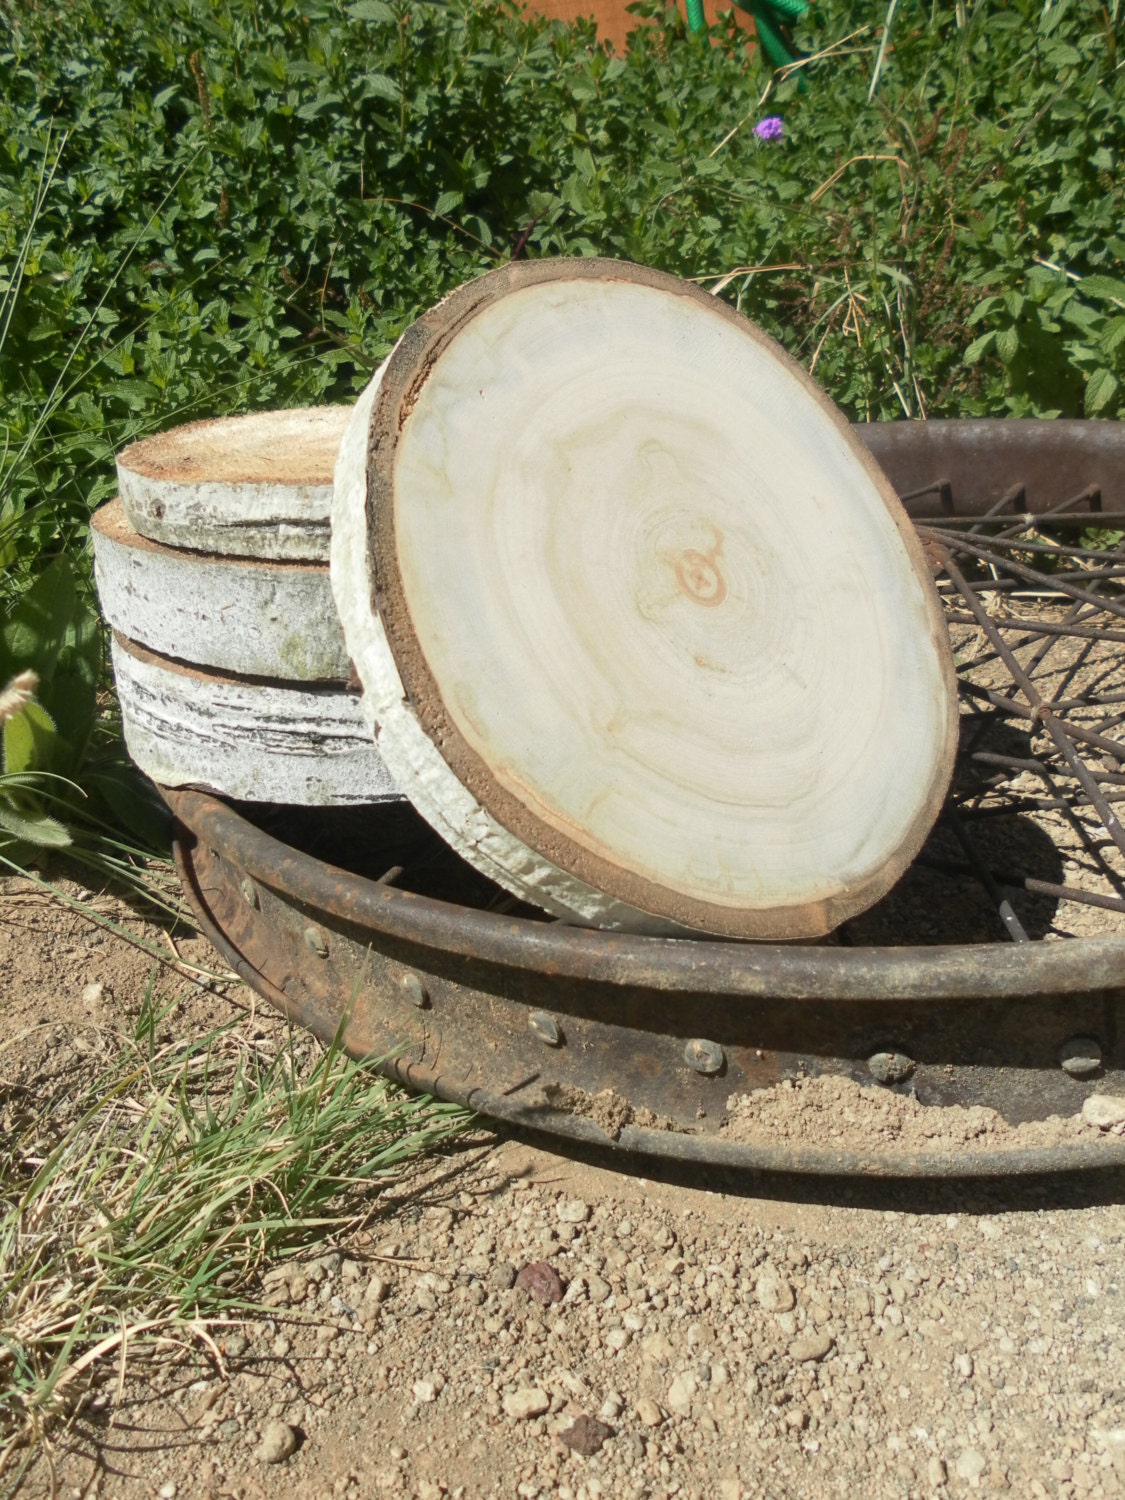 Large Aspen Tree Slice - 7 inch to 8 inch - 1 inch thick - Rustic Wedding Decor, Cake Stand, Charger, Wedding Centerpiece, Wood Slab